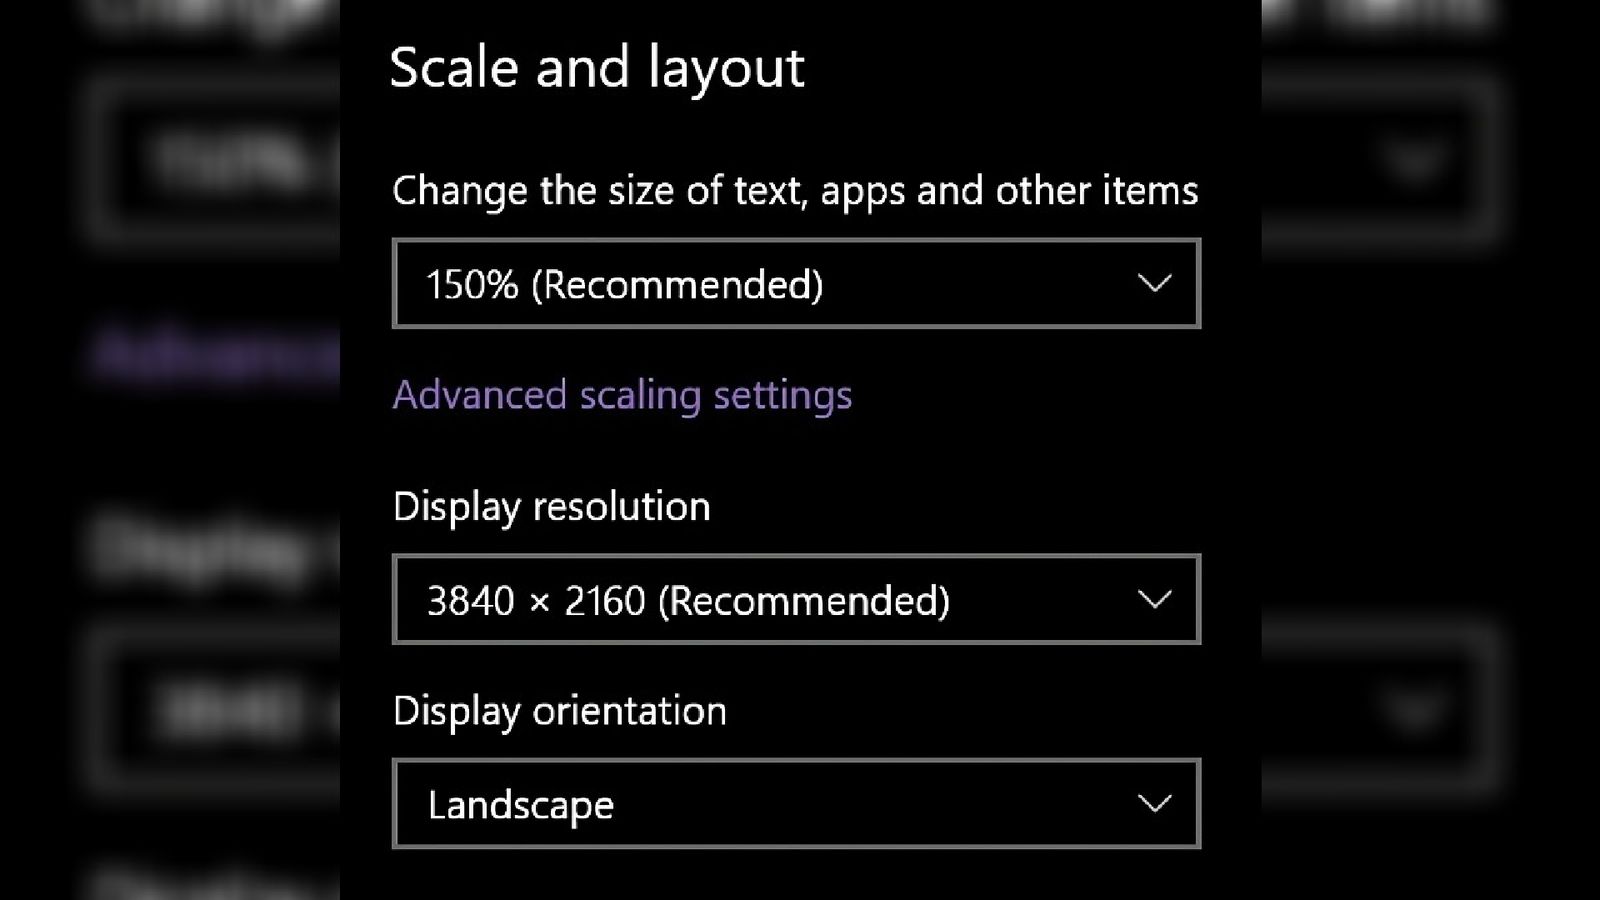 Image of scale and layout display settings in black and white.